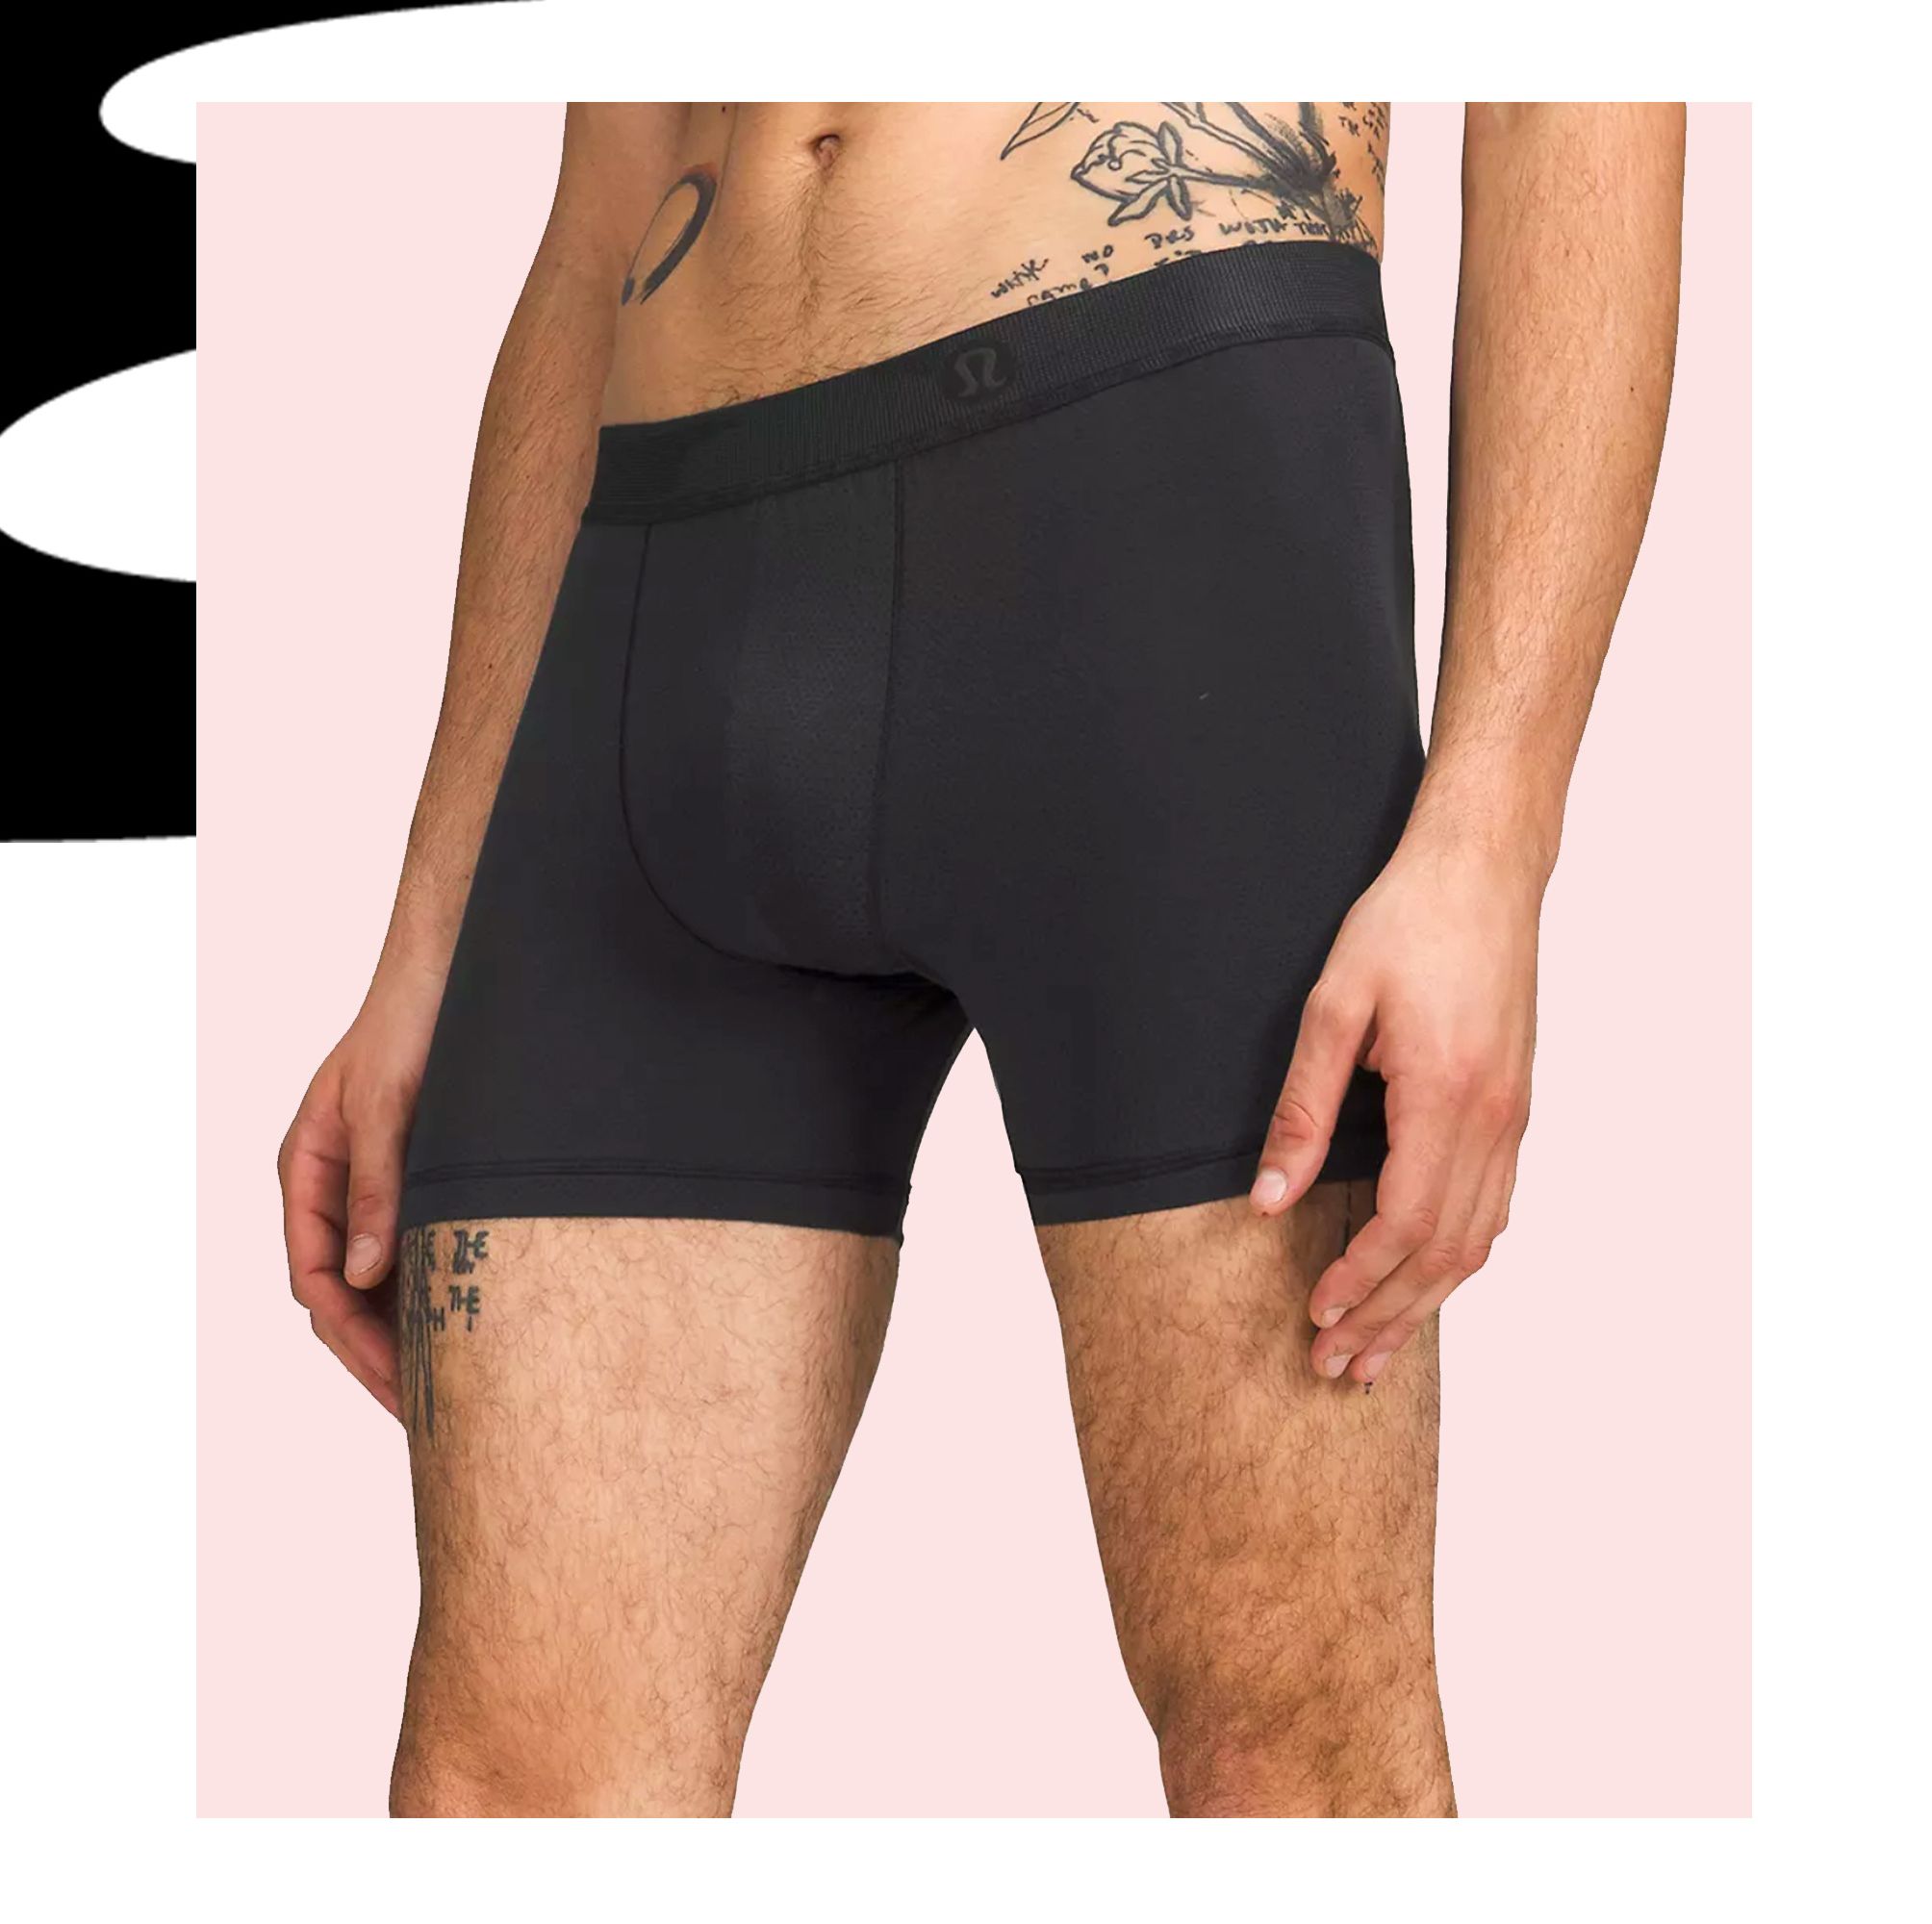 The Best Boxer Briefs Truly Are the Best of Both Worlds